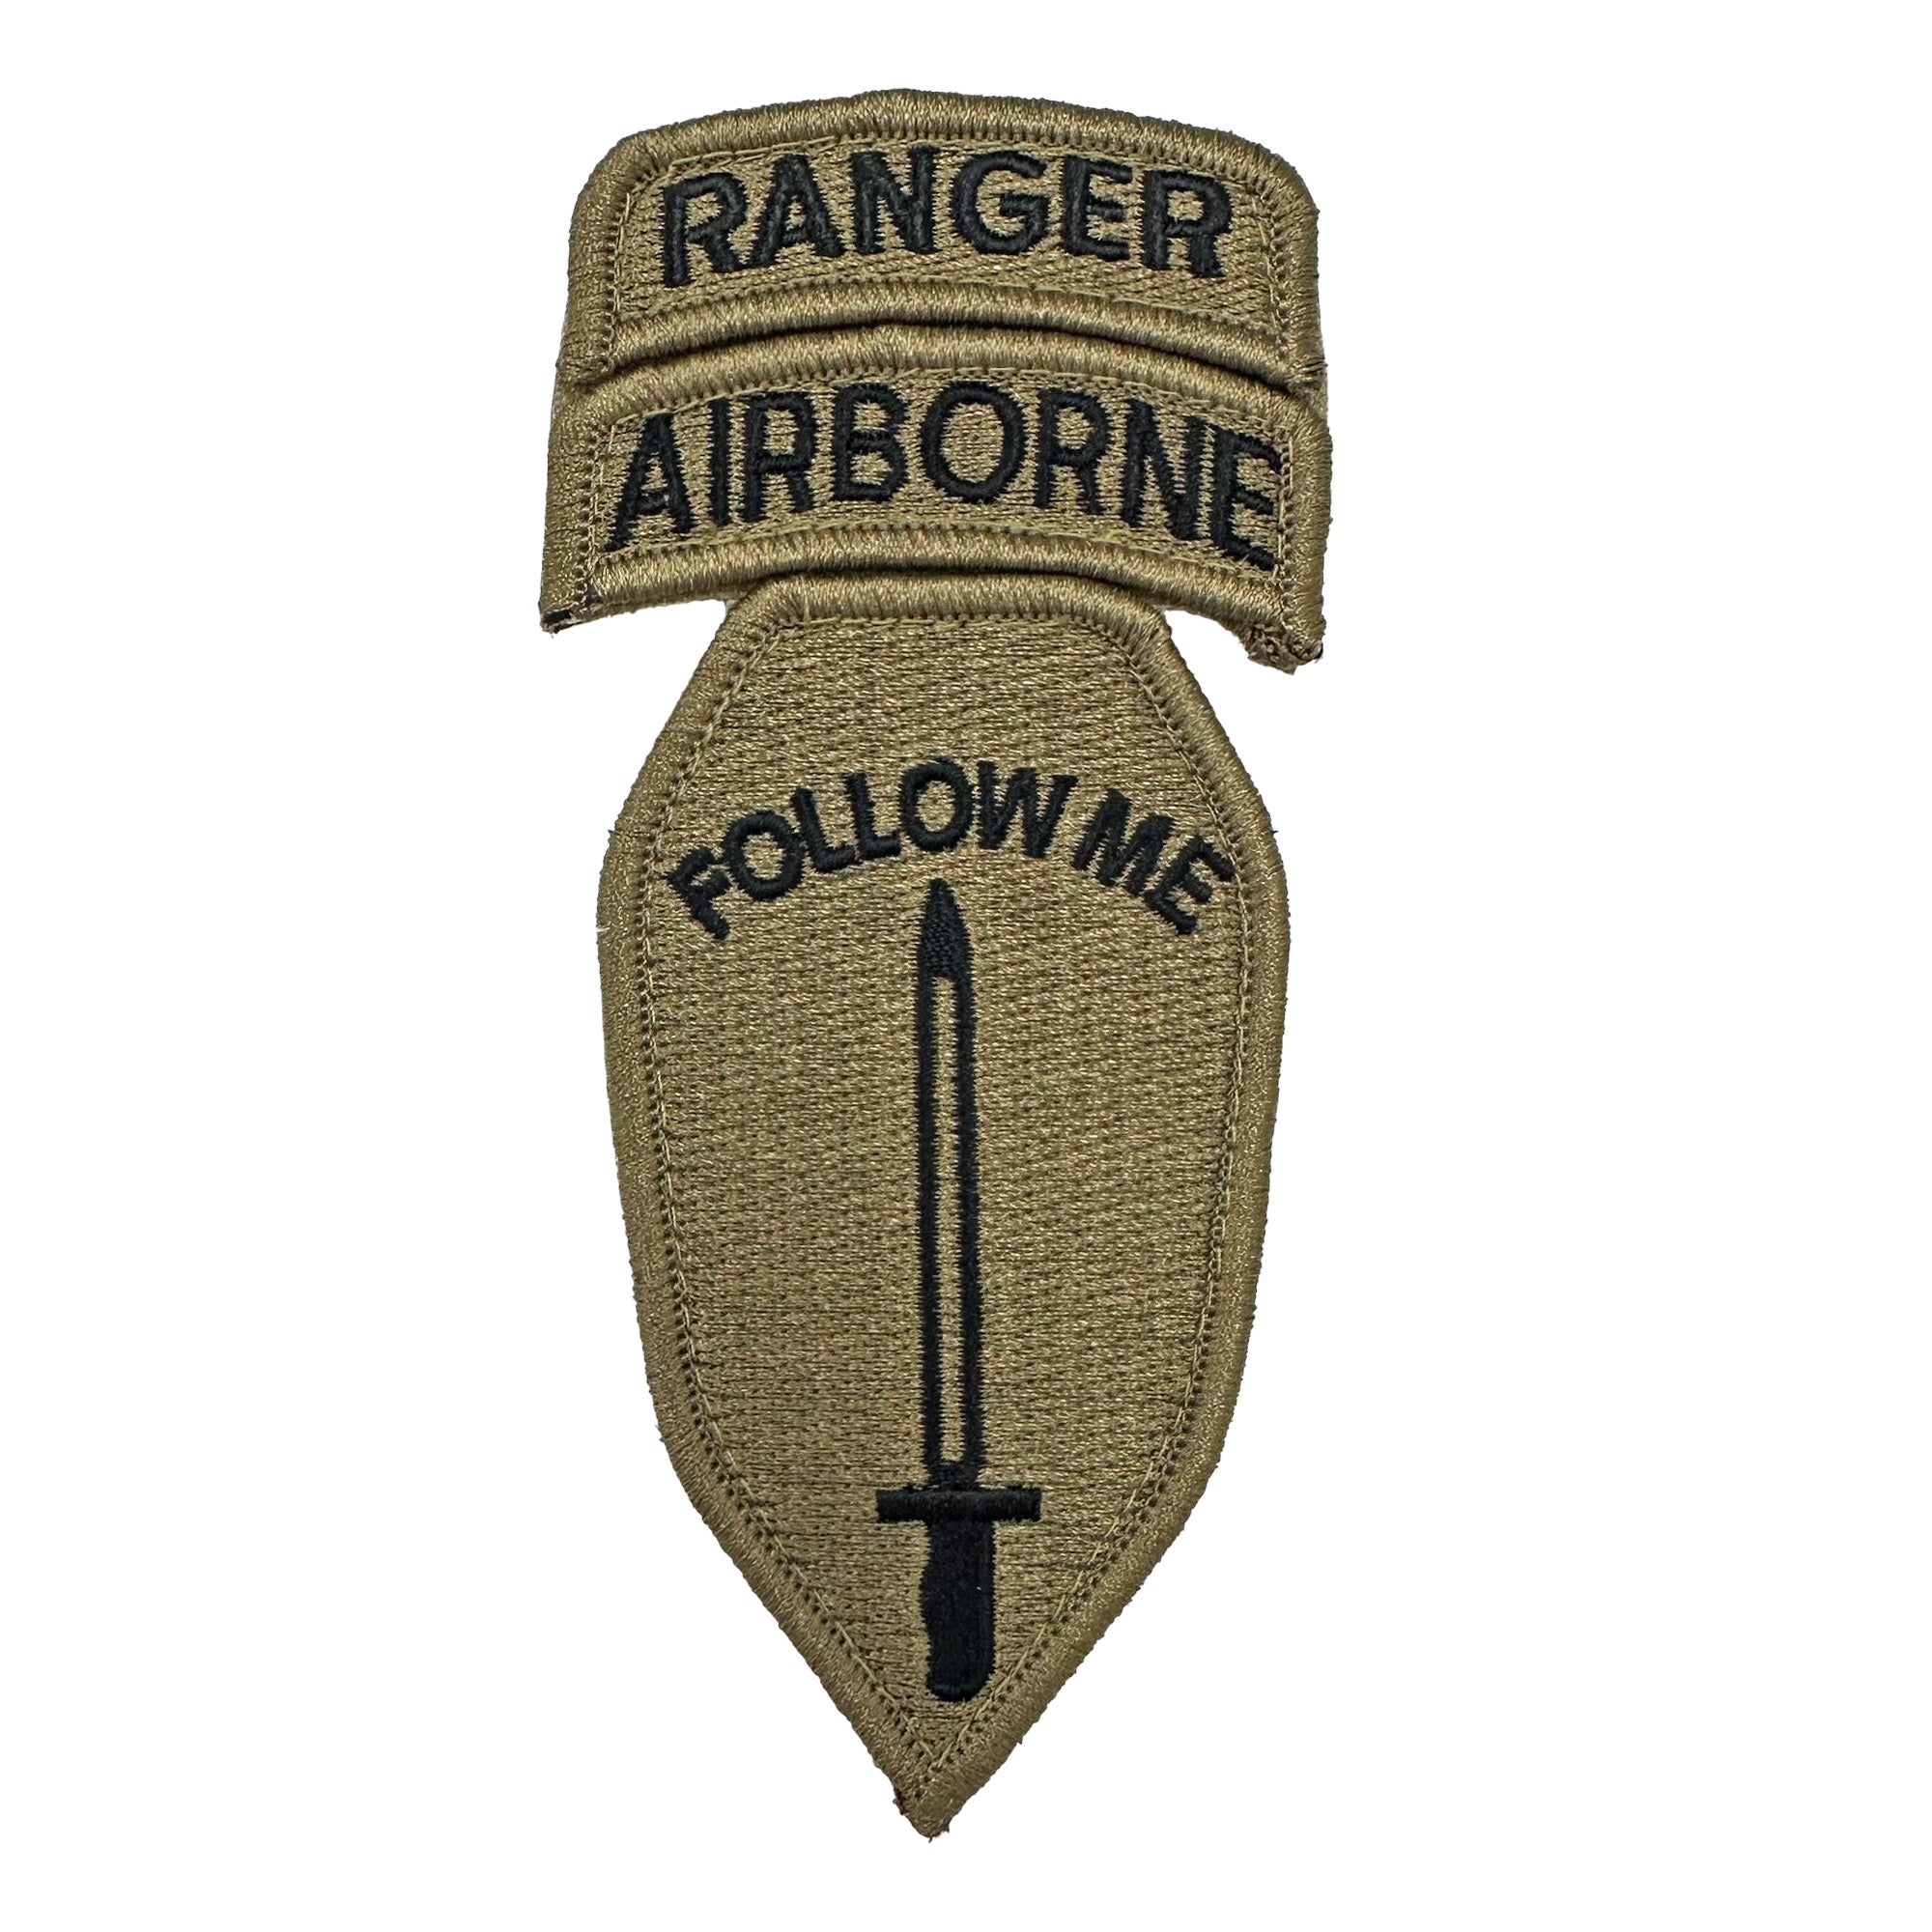 Infantry School "Follow Me" With Airborne and Ranger Tabs OCP Patch with Hook Fastener (Each) - Insignia Depot